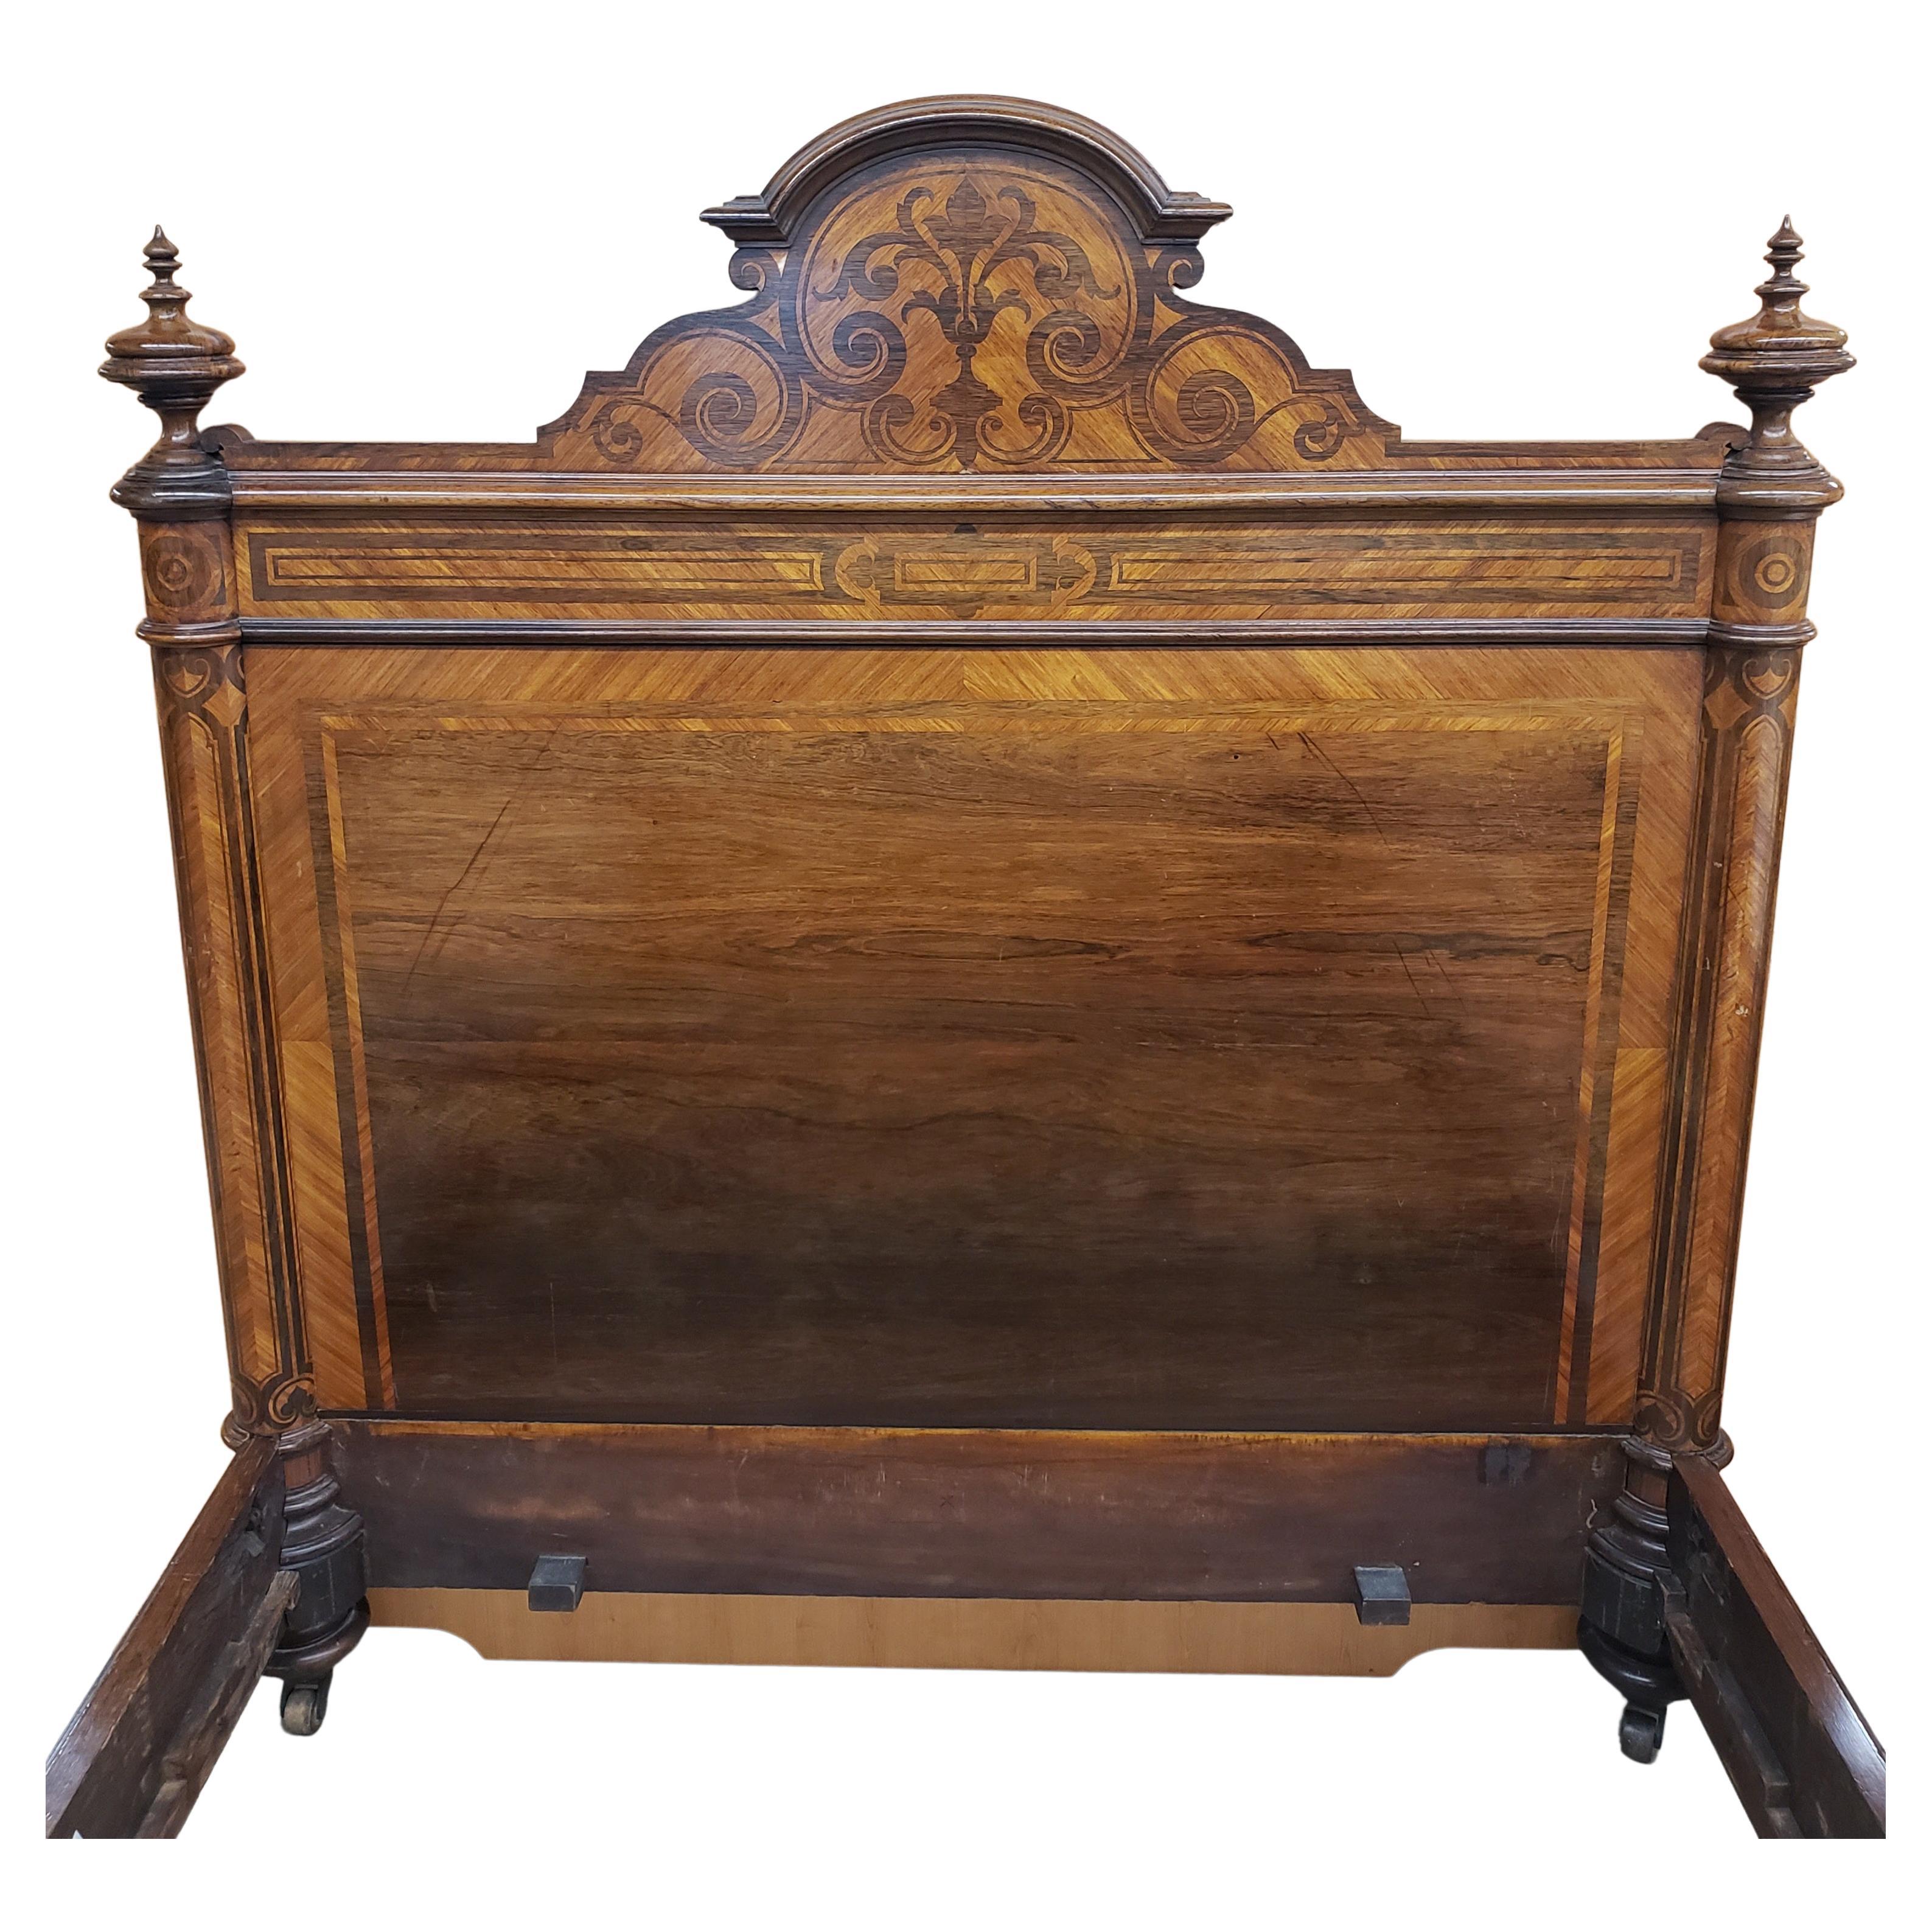 William IV Style Rosewood and Kingwood Marquetry And Parquetry Bedstead, C 1920s For Sale 2